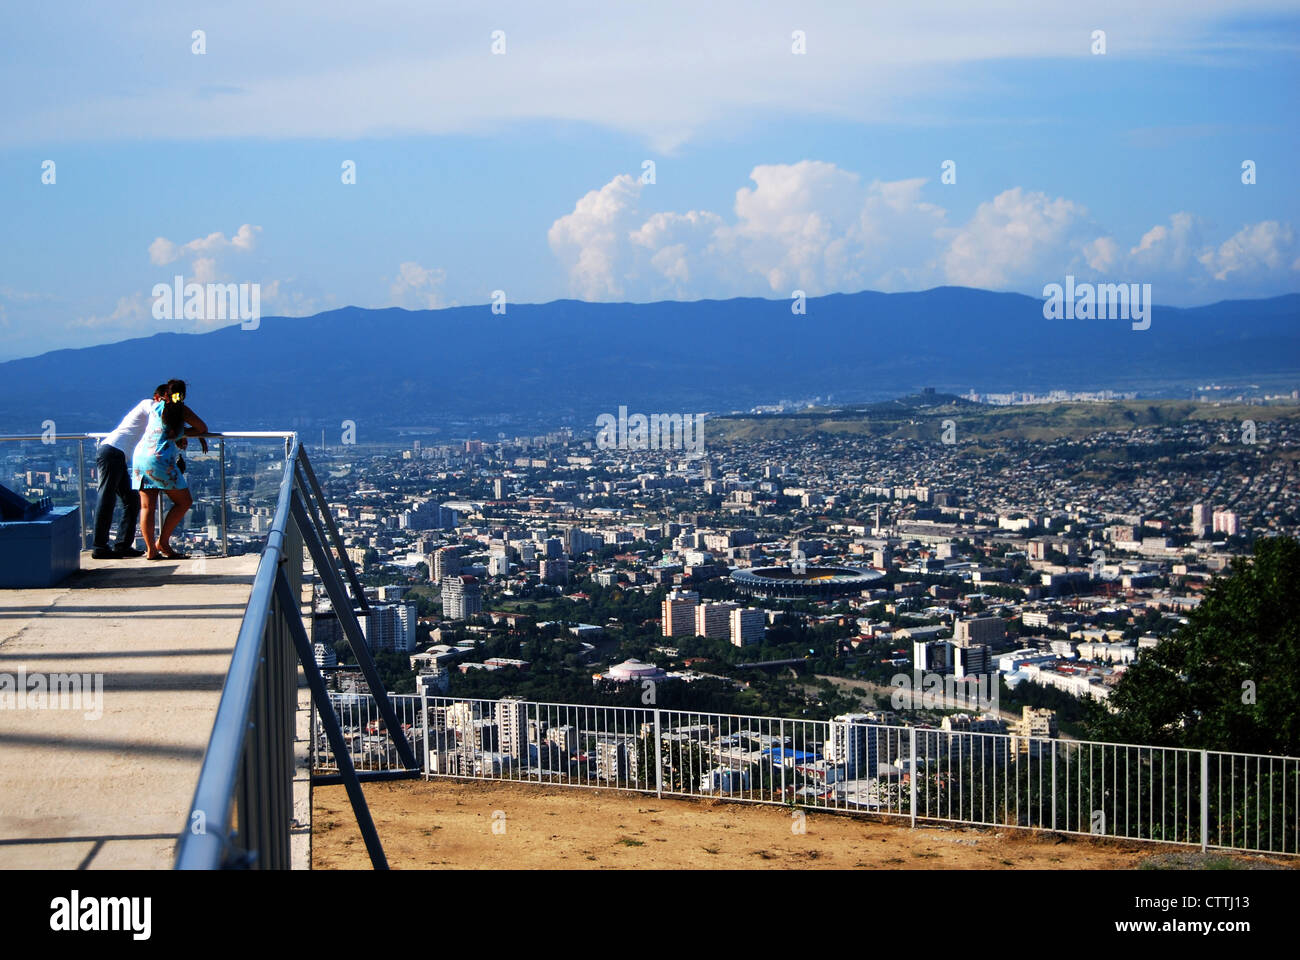 Couple Looking over Tbilisi Stock Photo